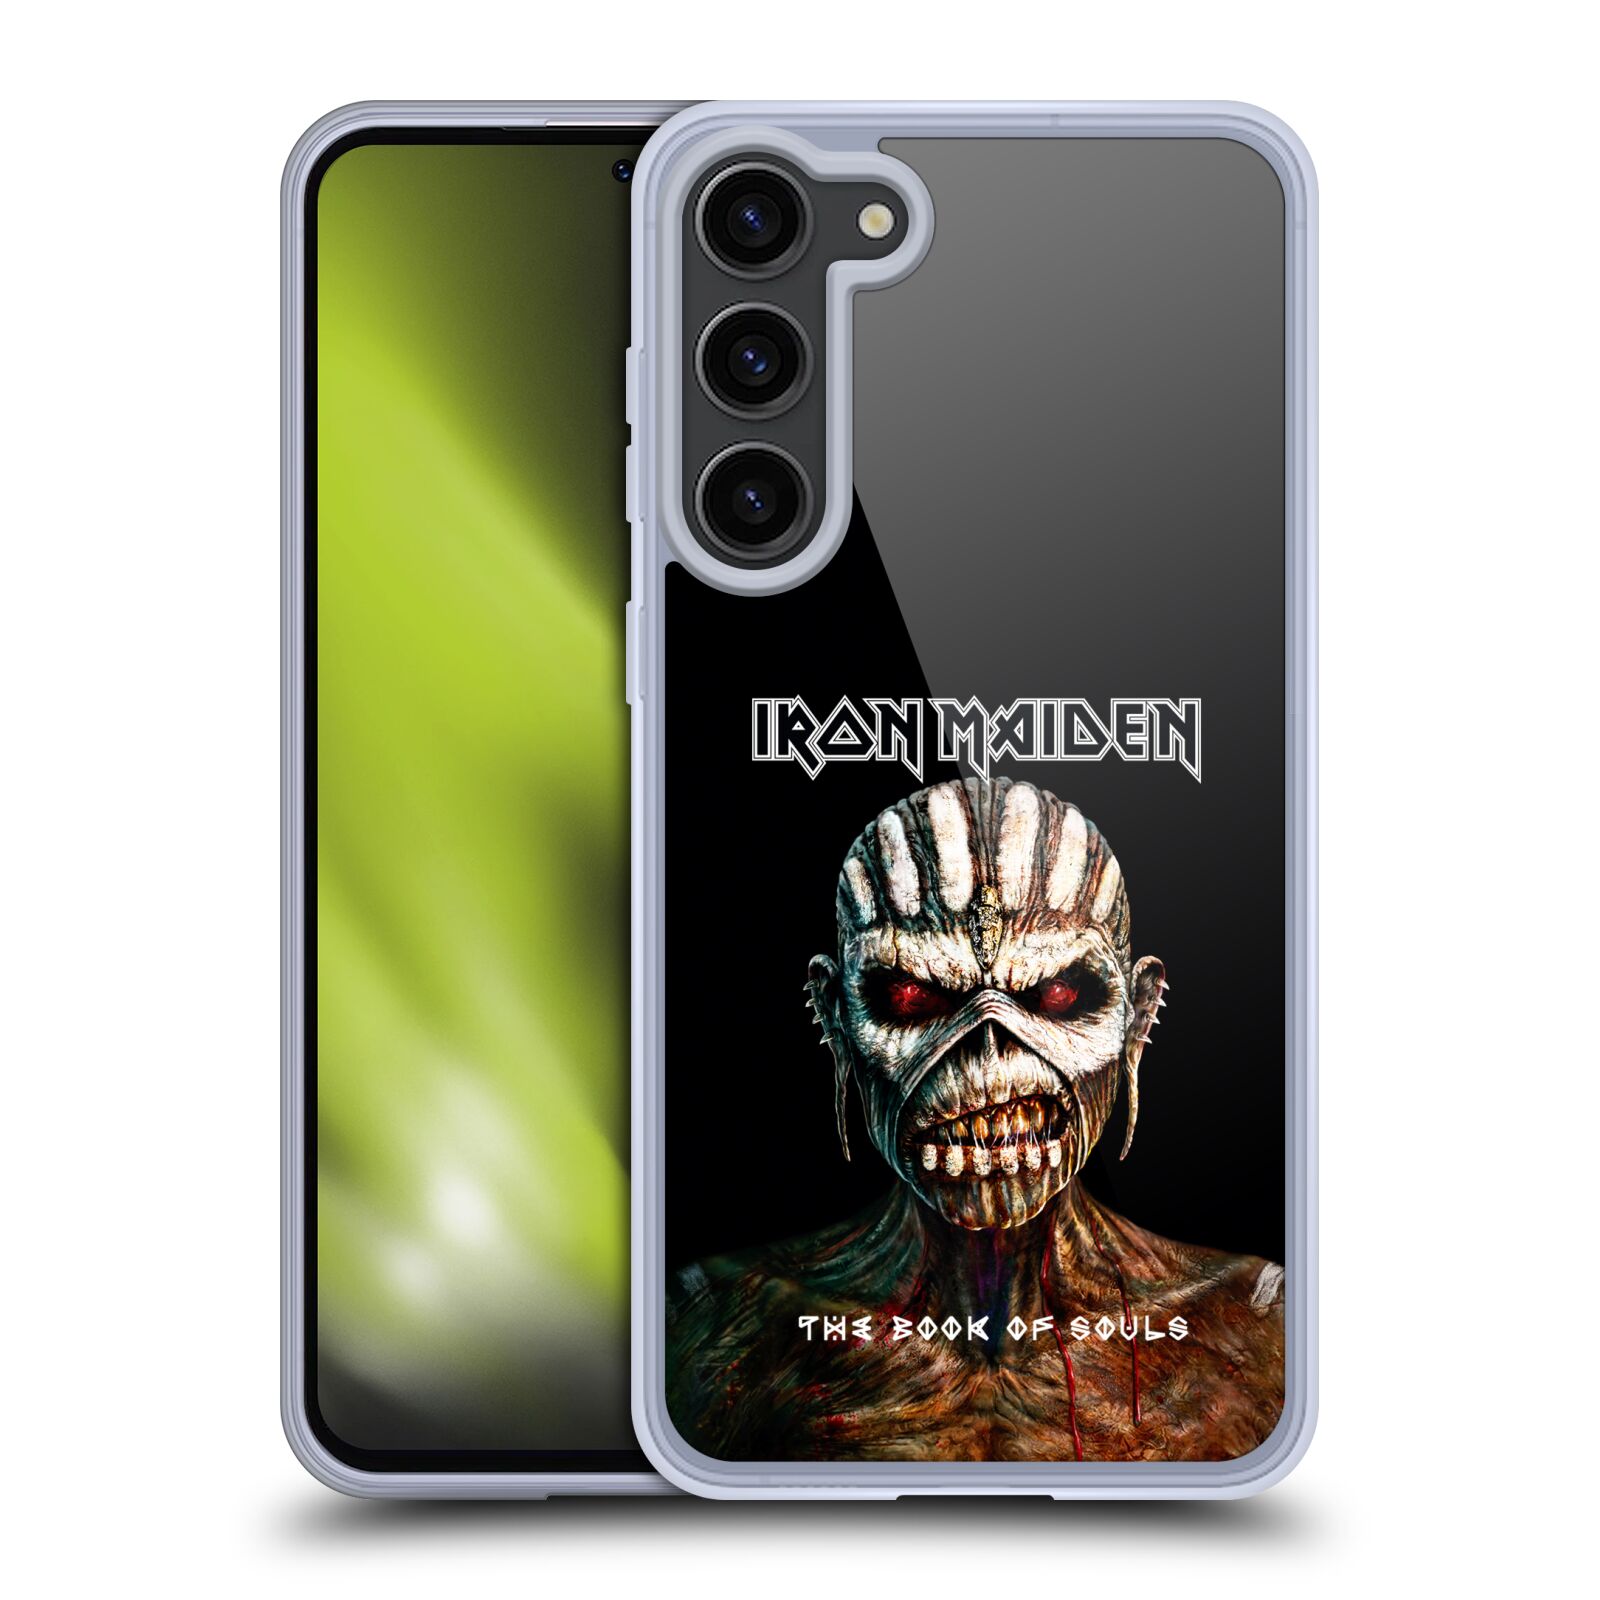 Silikonové pouzdro na mobil Samsung Galaxy S23 Plus - Head Case - Iron Maiden - The Book Of Souls (Silikonový kryt, obal, pouzdro na mobilní telefon Samsung Galaxy S23 Plus s motivem Iron Maiden - The Book Of Souls)